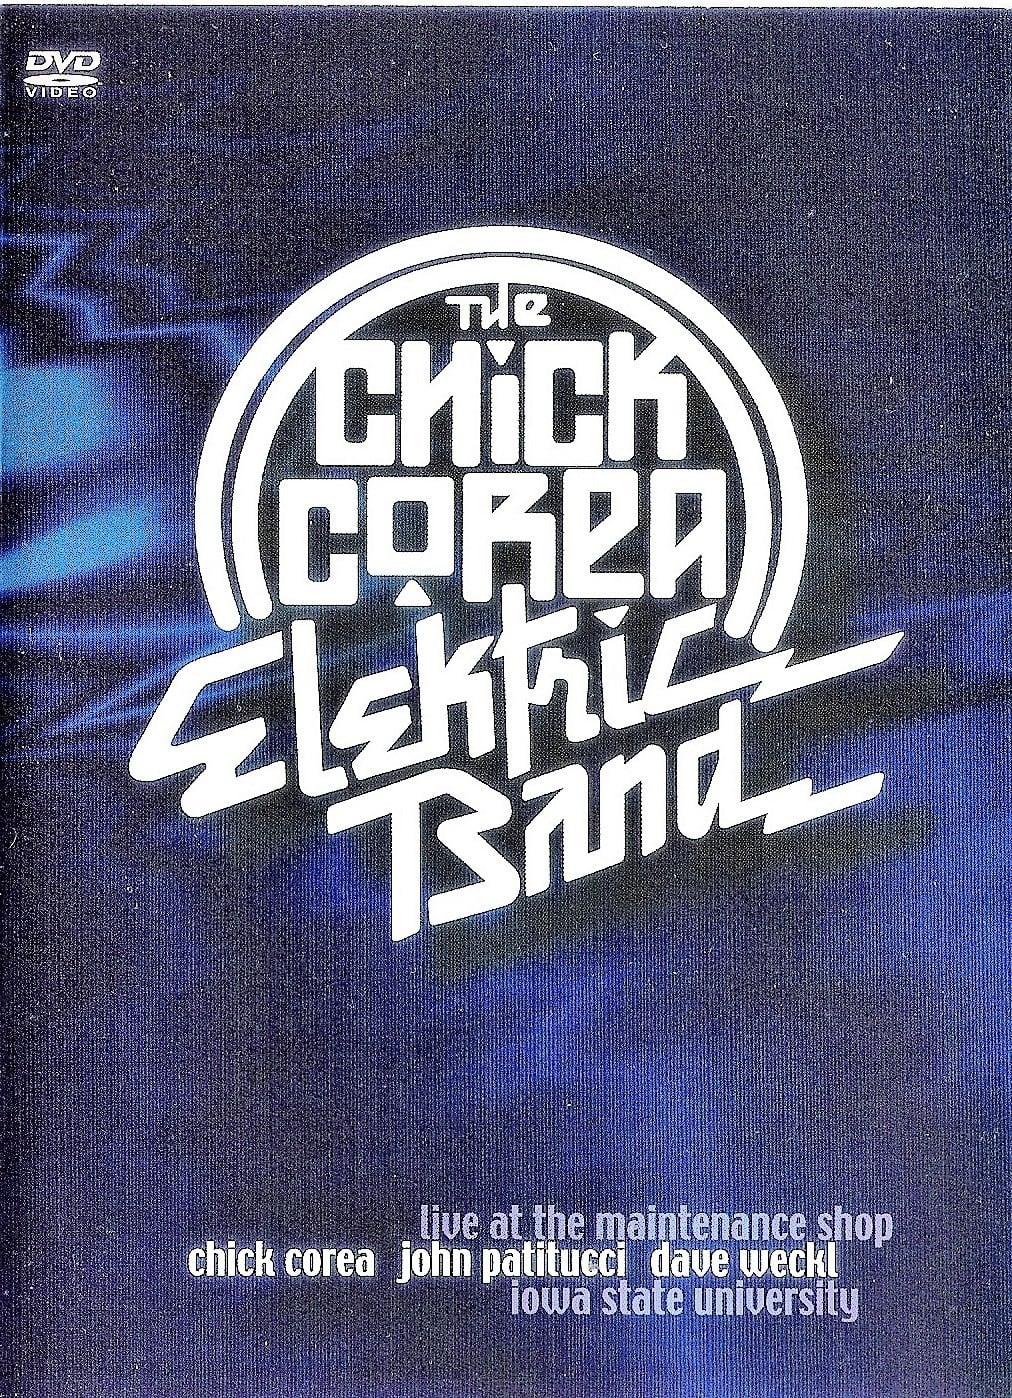 The Chick Corea Elektric Band: Live at the Maintenance Shop poster